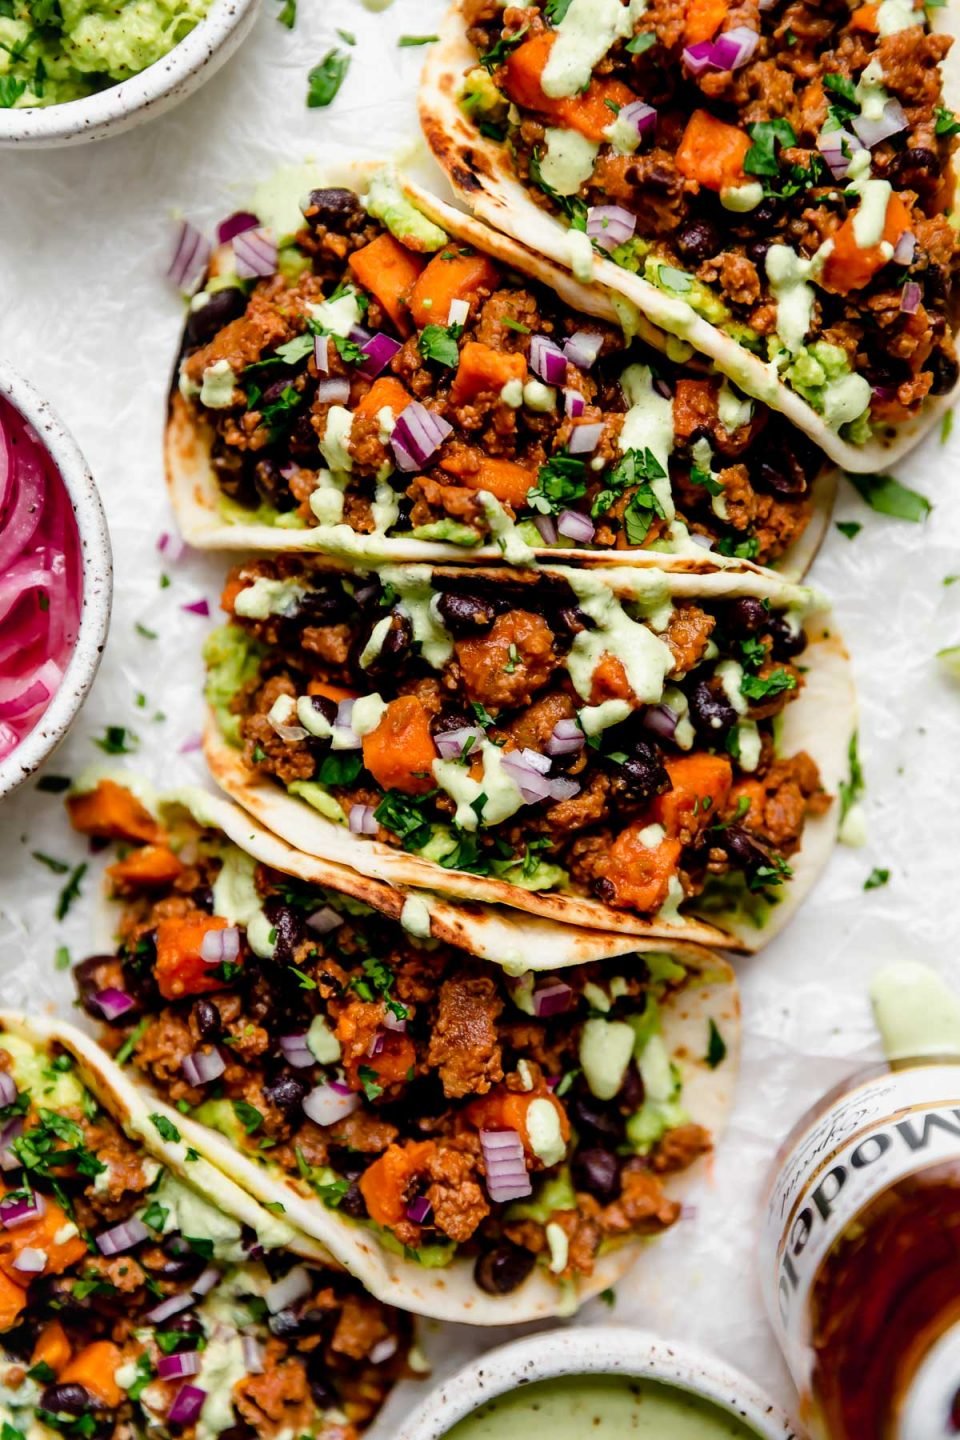 Chorizo Sweet Potato Tacos arranged on a white surface. The tacos are topped with a drizzle of homemade cilantro lime crema. Surrounding the tacos are small bowls of taco toppings (pickled red onions, guacamole, crema, etc.) & a bottle of Modelo beer.